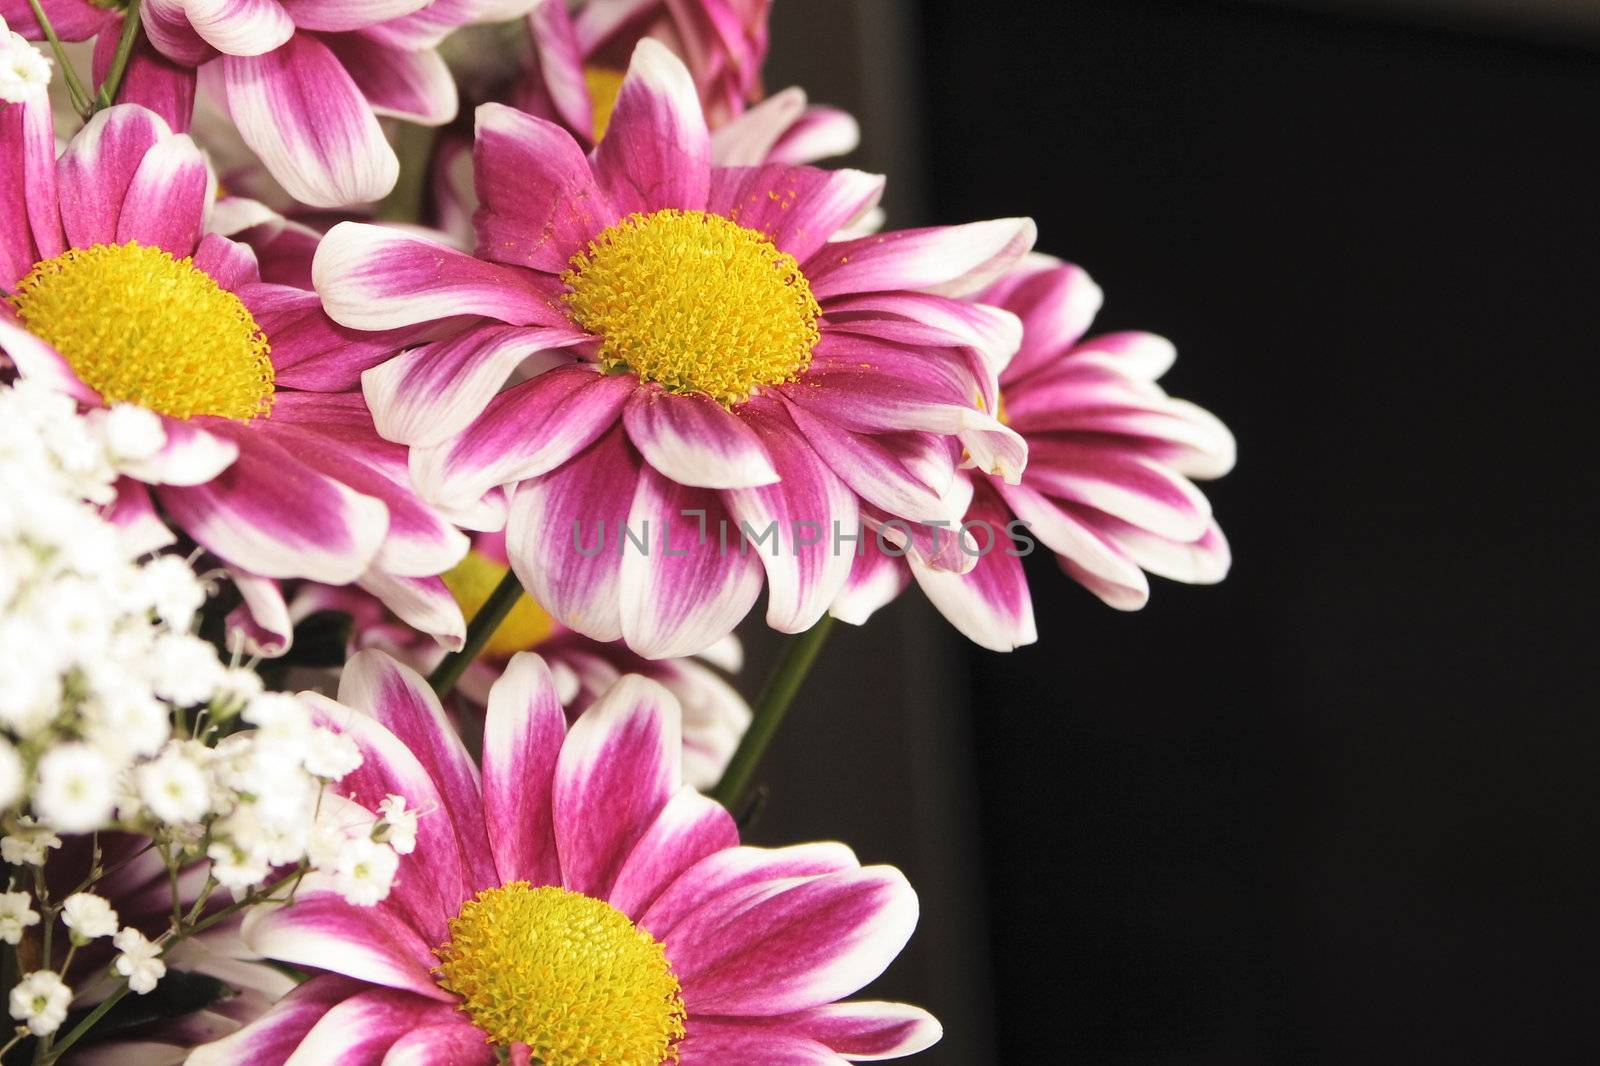 pink and white chrysanthemums against a dark background